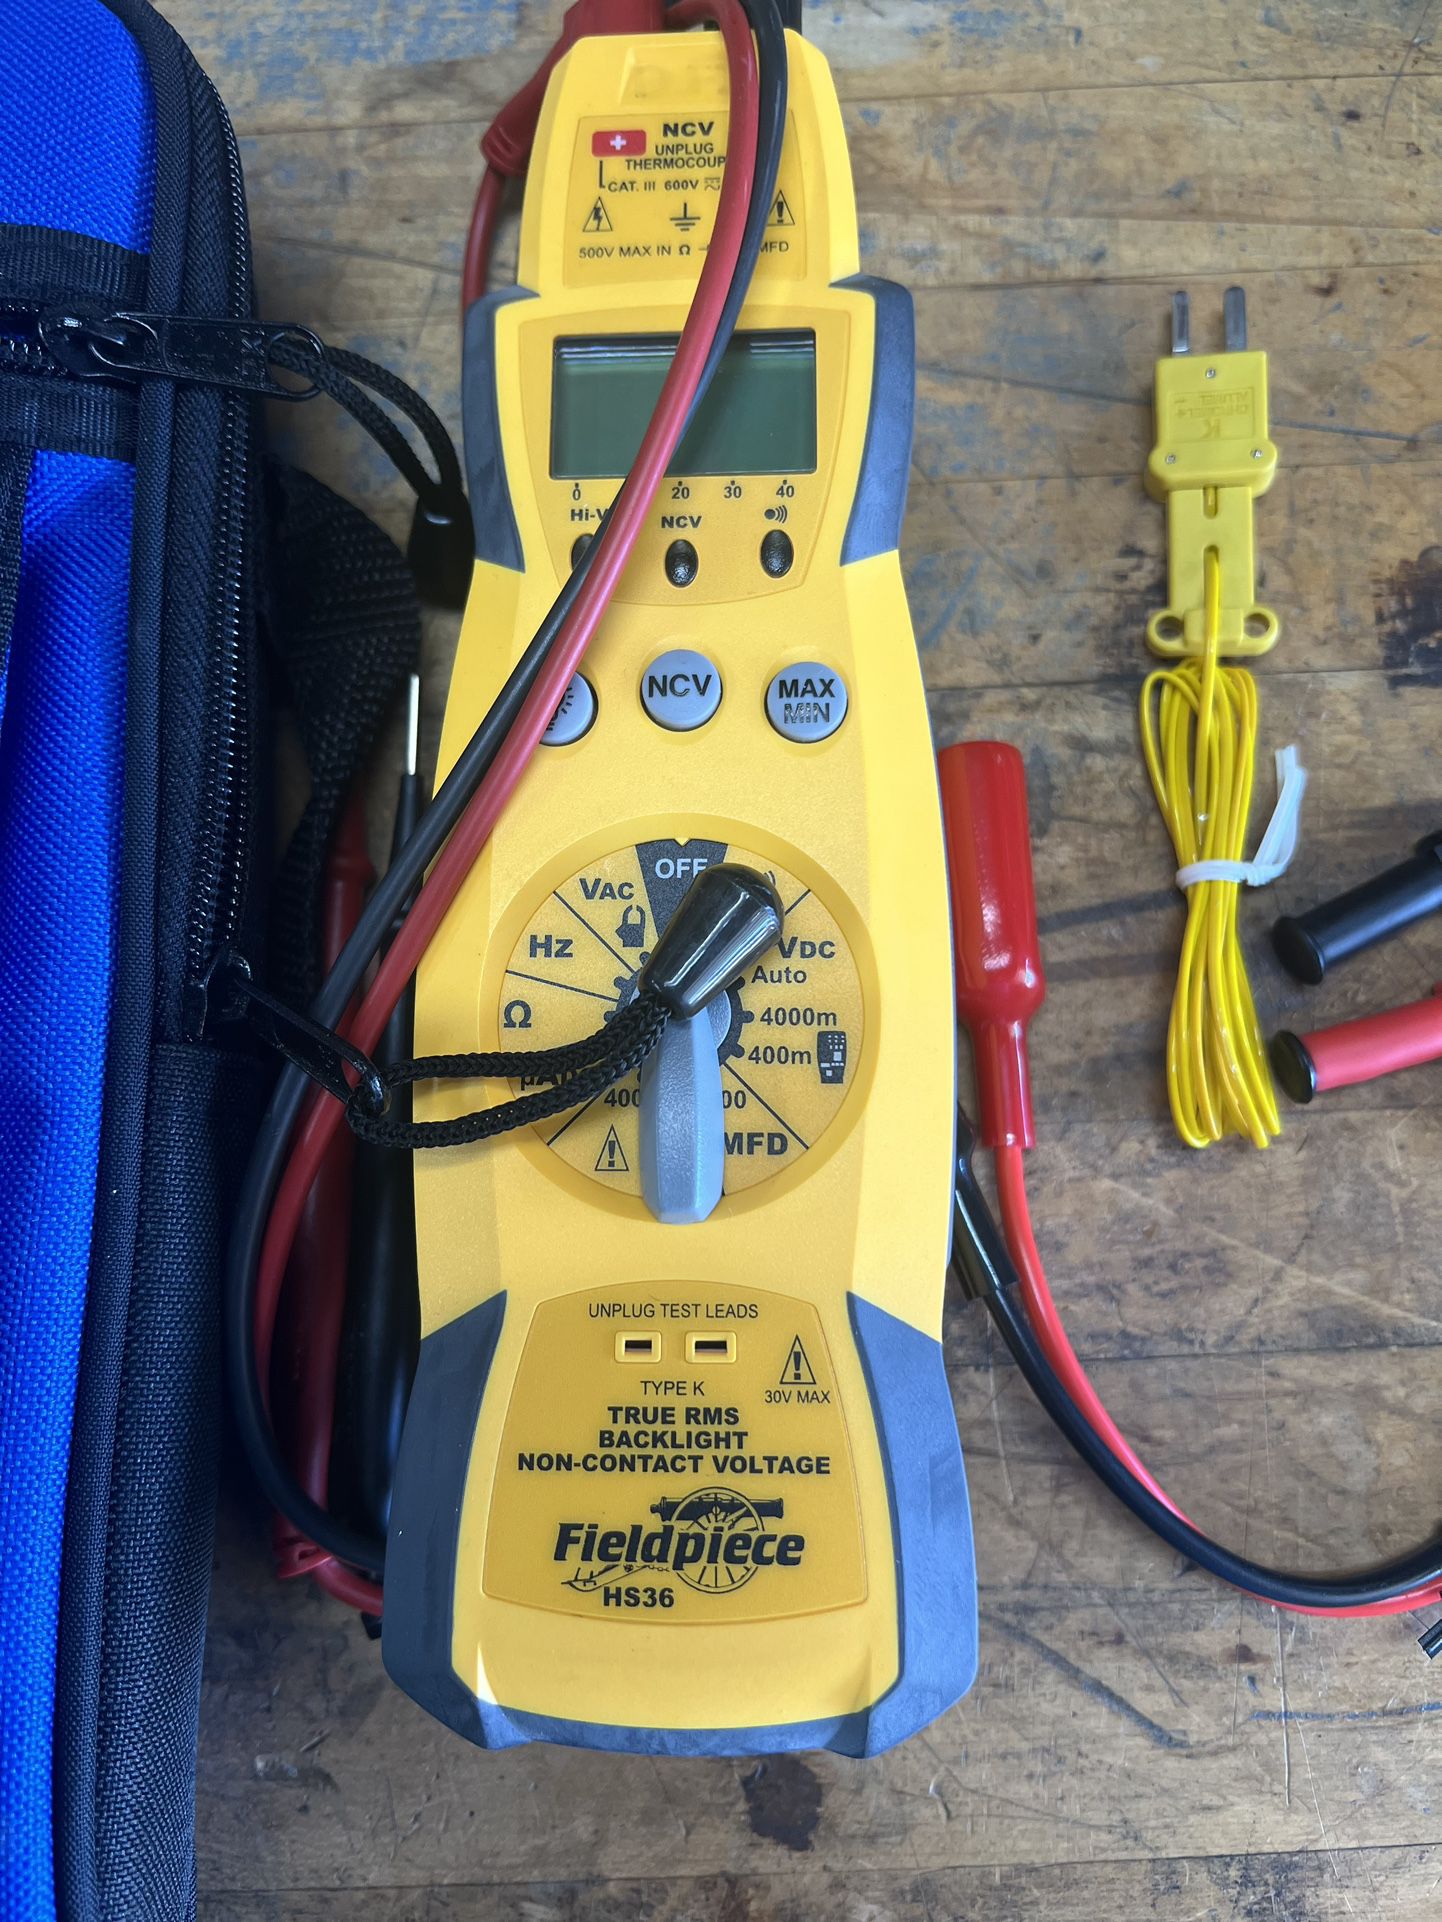 Fieldpiece Multi Meter Amp Clamp And A/c Charging Kit. 